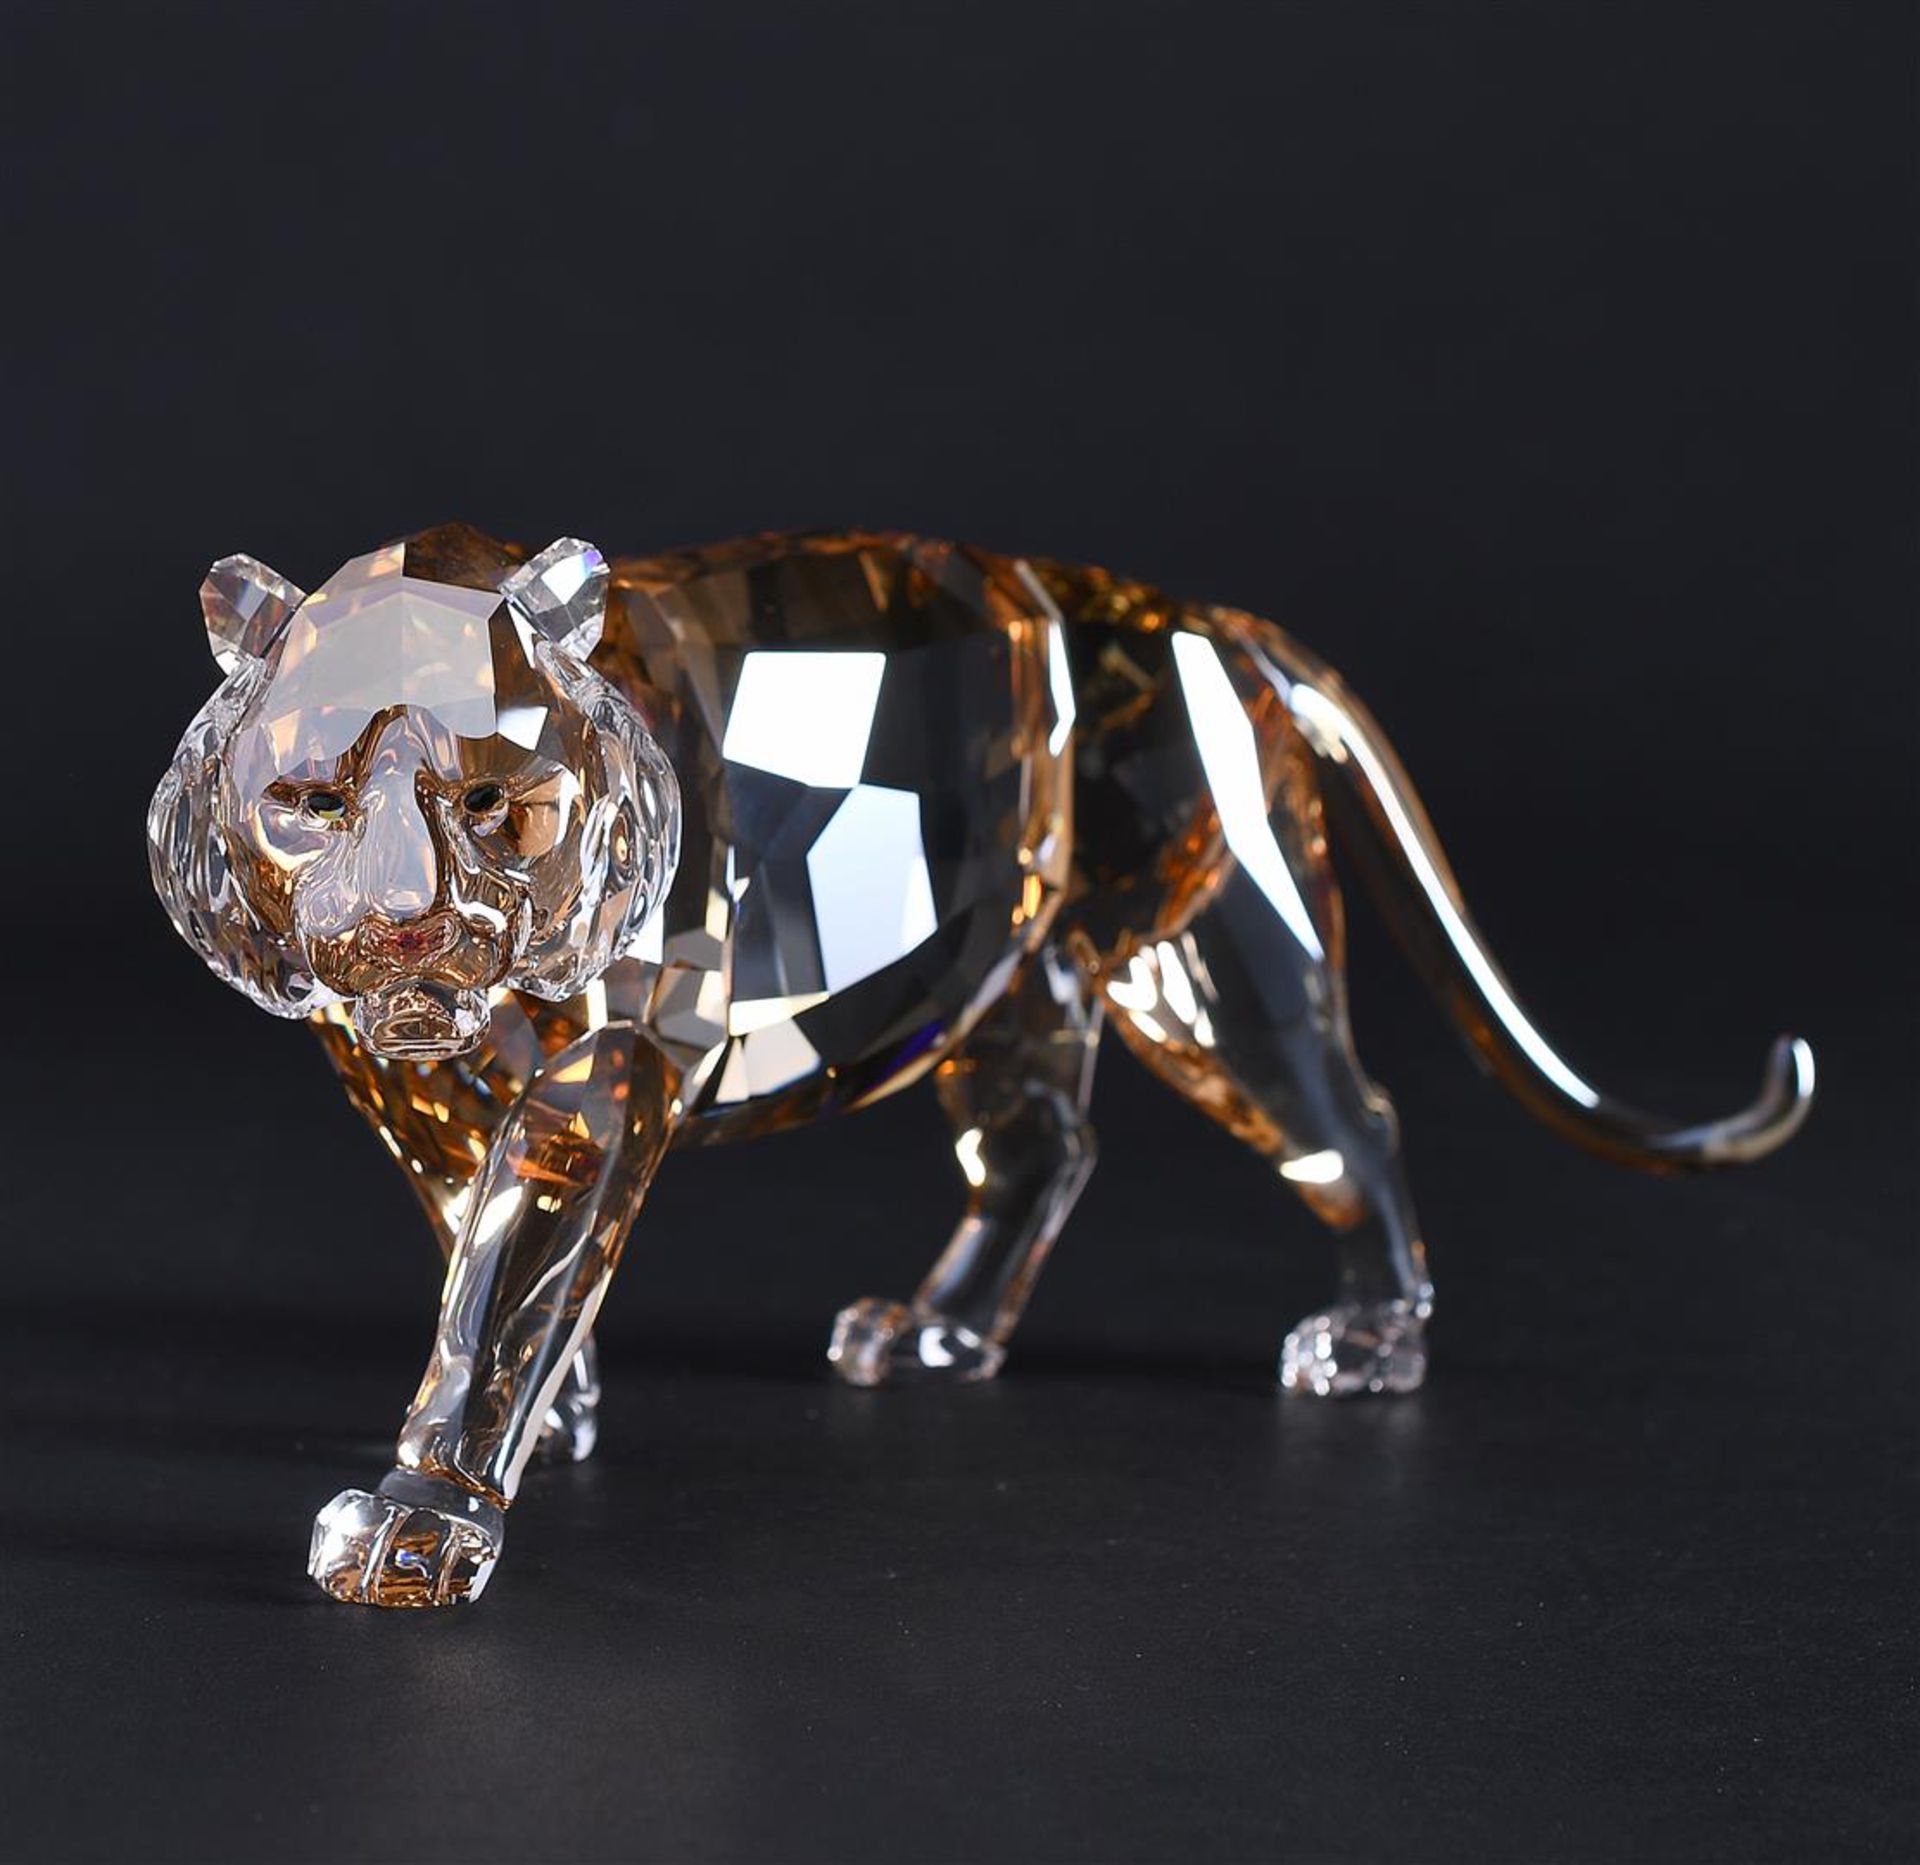 Swarovski SCS, Annual Edition 2010 -tiger, Year of issue 2010 ,1003148. Includes original box.
18,5  - Image 2 of 5